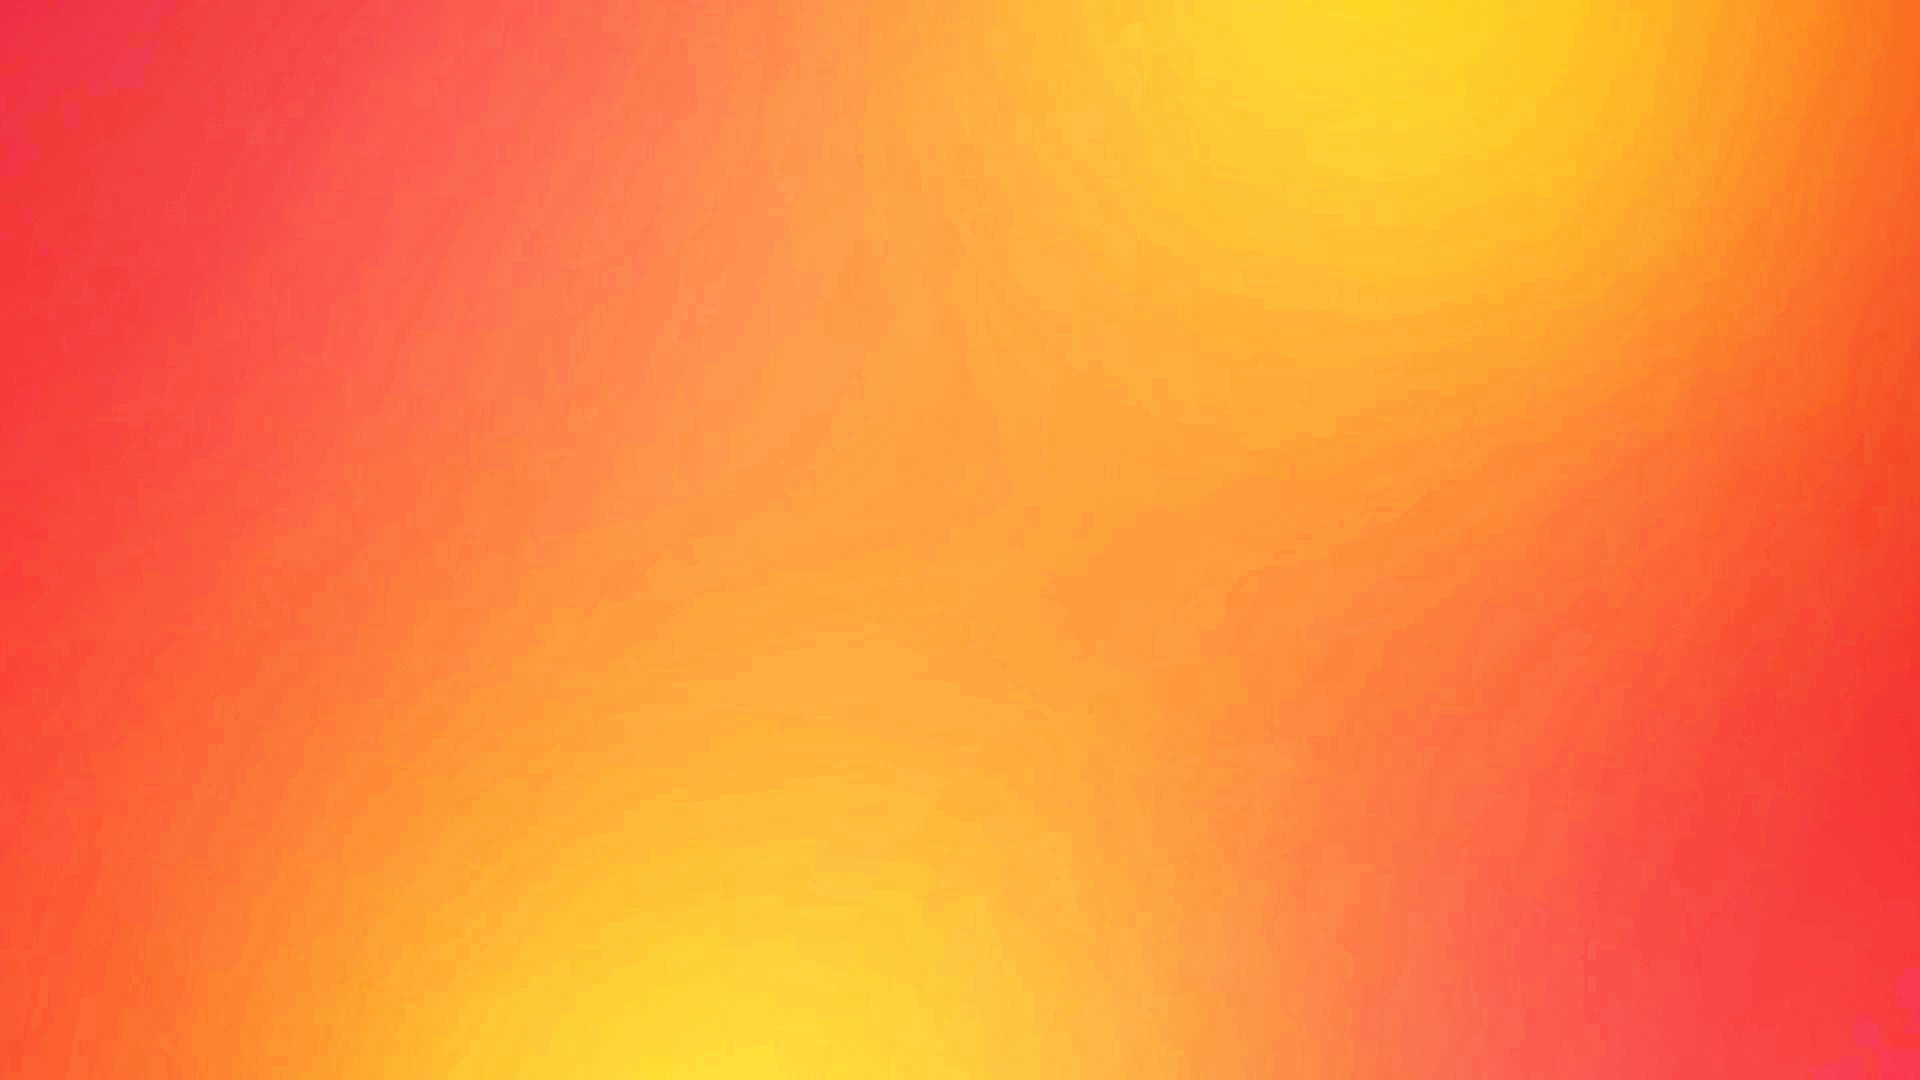 1920x1080 Pink And Yellow Gradient Abstract Wallpaper Free Images at Clker.